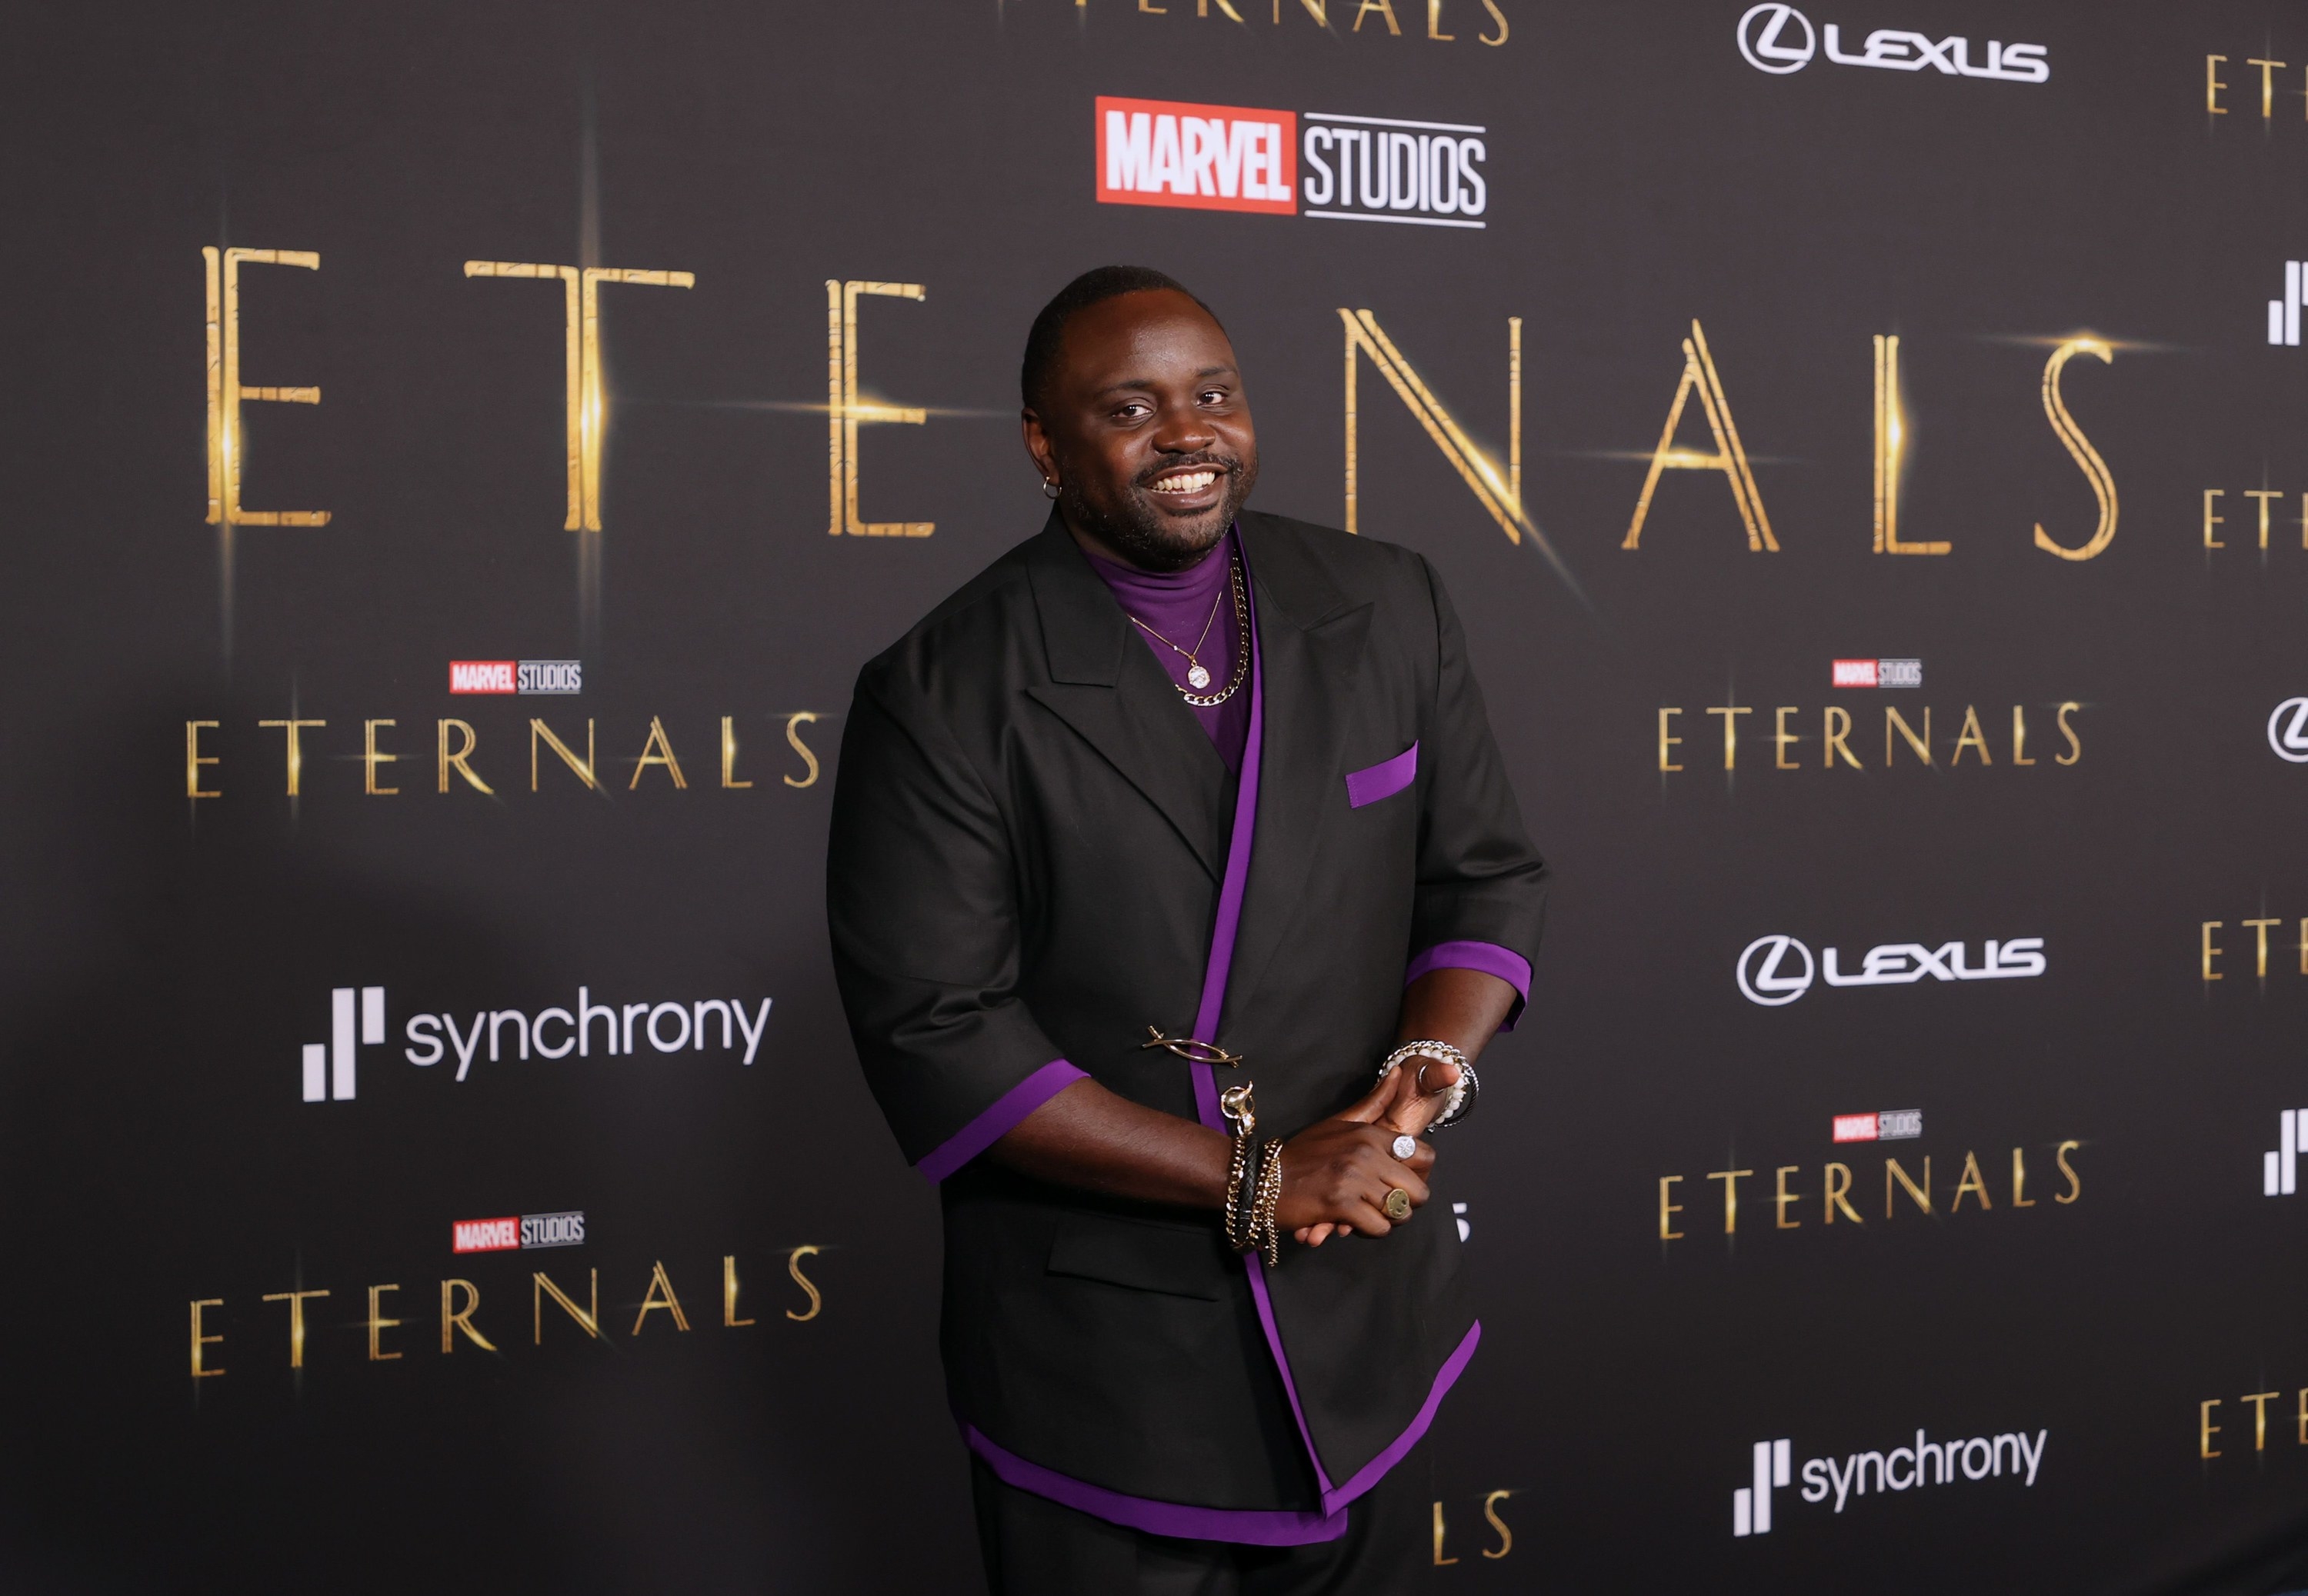 Brian smiles at the Eternals premiere, wearing an elbow-length black blazer with purple trim and a purple turtleneck